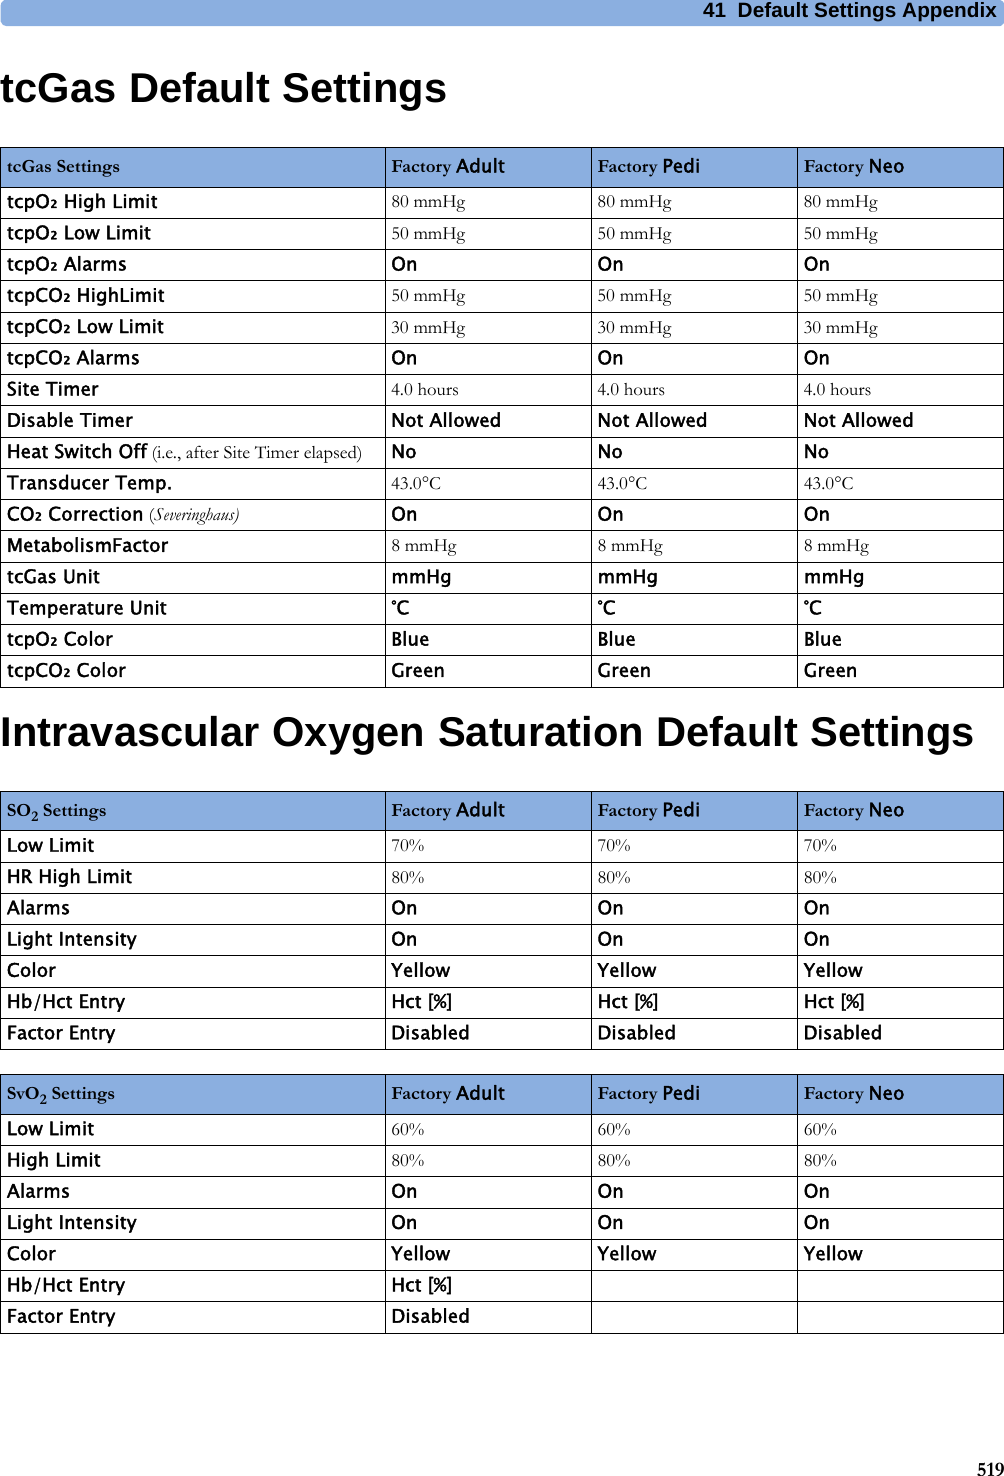 41 Default Settings Appendix519tcGas Default SettingsIntravascular Oxygen Saturation Default SettingstcGas Settings Factory Adult Factory Pedi Factory NeotcpO₂ High Limit 80 mmHg 80 mmHg 80 mmHgtcpO₂ Low Limit 50 mmHg 50 mmHg 50 mmHgtcpO₂ Alarms On On OntcpCO₂ HighLimit 50 mmHg 50 mmHg 50 mmHgtcpCO₂ Low Limit 30 mmHg 30 mmHg 30 mmHgtcpCO₂ Alarms On On OnSite Timer 4.0 hours 4.0 hours 4.0 hoursDisable Timer Not Allowed Not Allowed Not AllowedHeat Switch Off (i.e., after Site Timer elapsed) No No NoTransducer Temp. 43.0°C 43.0°C 43.0°CCO₂ Correction (Severinghaus) On On OnMetabolismFactor 8 mmHg 8 mmHg 8 mmHgtcGas Unit mmHg mmHg mmHgTemperature Unit °C °C °CtcpO₂ Color Blue Blue BluetcpCO₂ Color Green Green GreenSO2 Settings Factory Adult Factory Pedi Factory NeoLow Limit 70% 70% 70%HR High Limit 80% 80% 80%Alarms On On OnLight Intensity On On OnColor Yellow Yellow YellowHb/Hct Entry Hct [%] Hct [%] Hct [%]Factor Entry Disabled Disabled DisabledSvO2 Settings Factory Adult Factory Pedi Factory NeoLow Limit 60% 60% 60%High Limit 80% 80% 80%Alarms On On OnLight Intensity On On OnColor Yellow Yellow YellowHb/Hct Entry Hct [%]Factor Entry Disabled